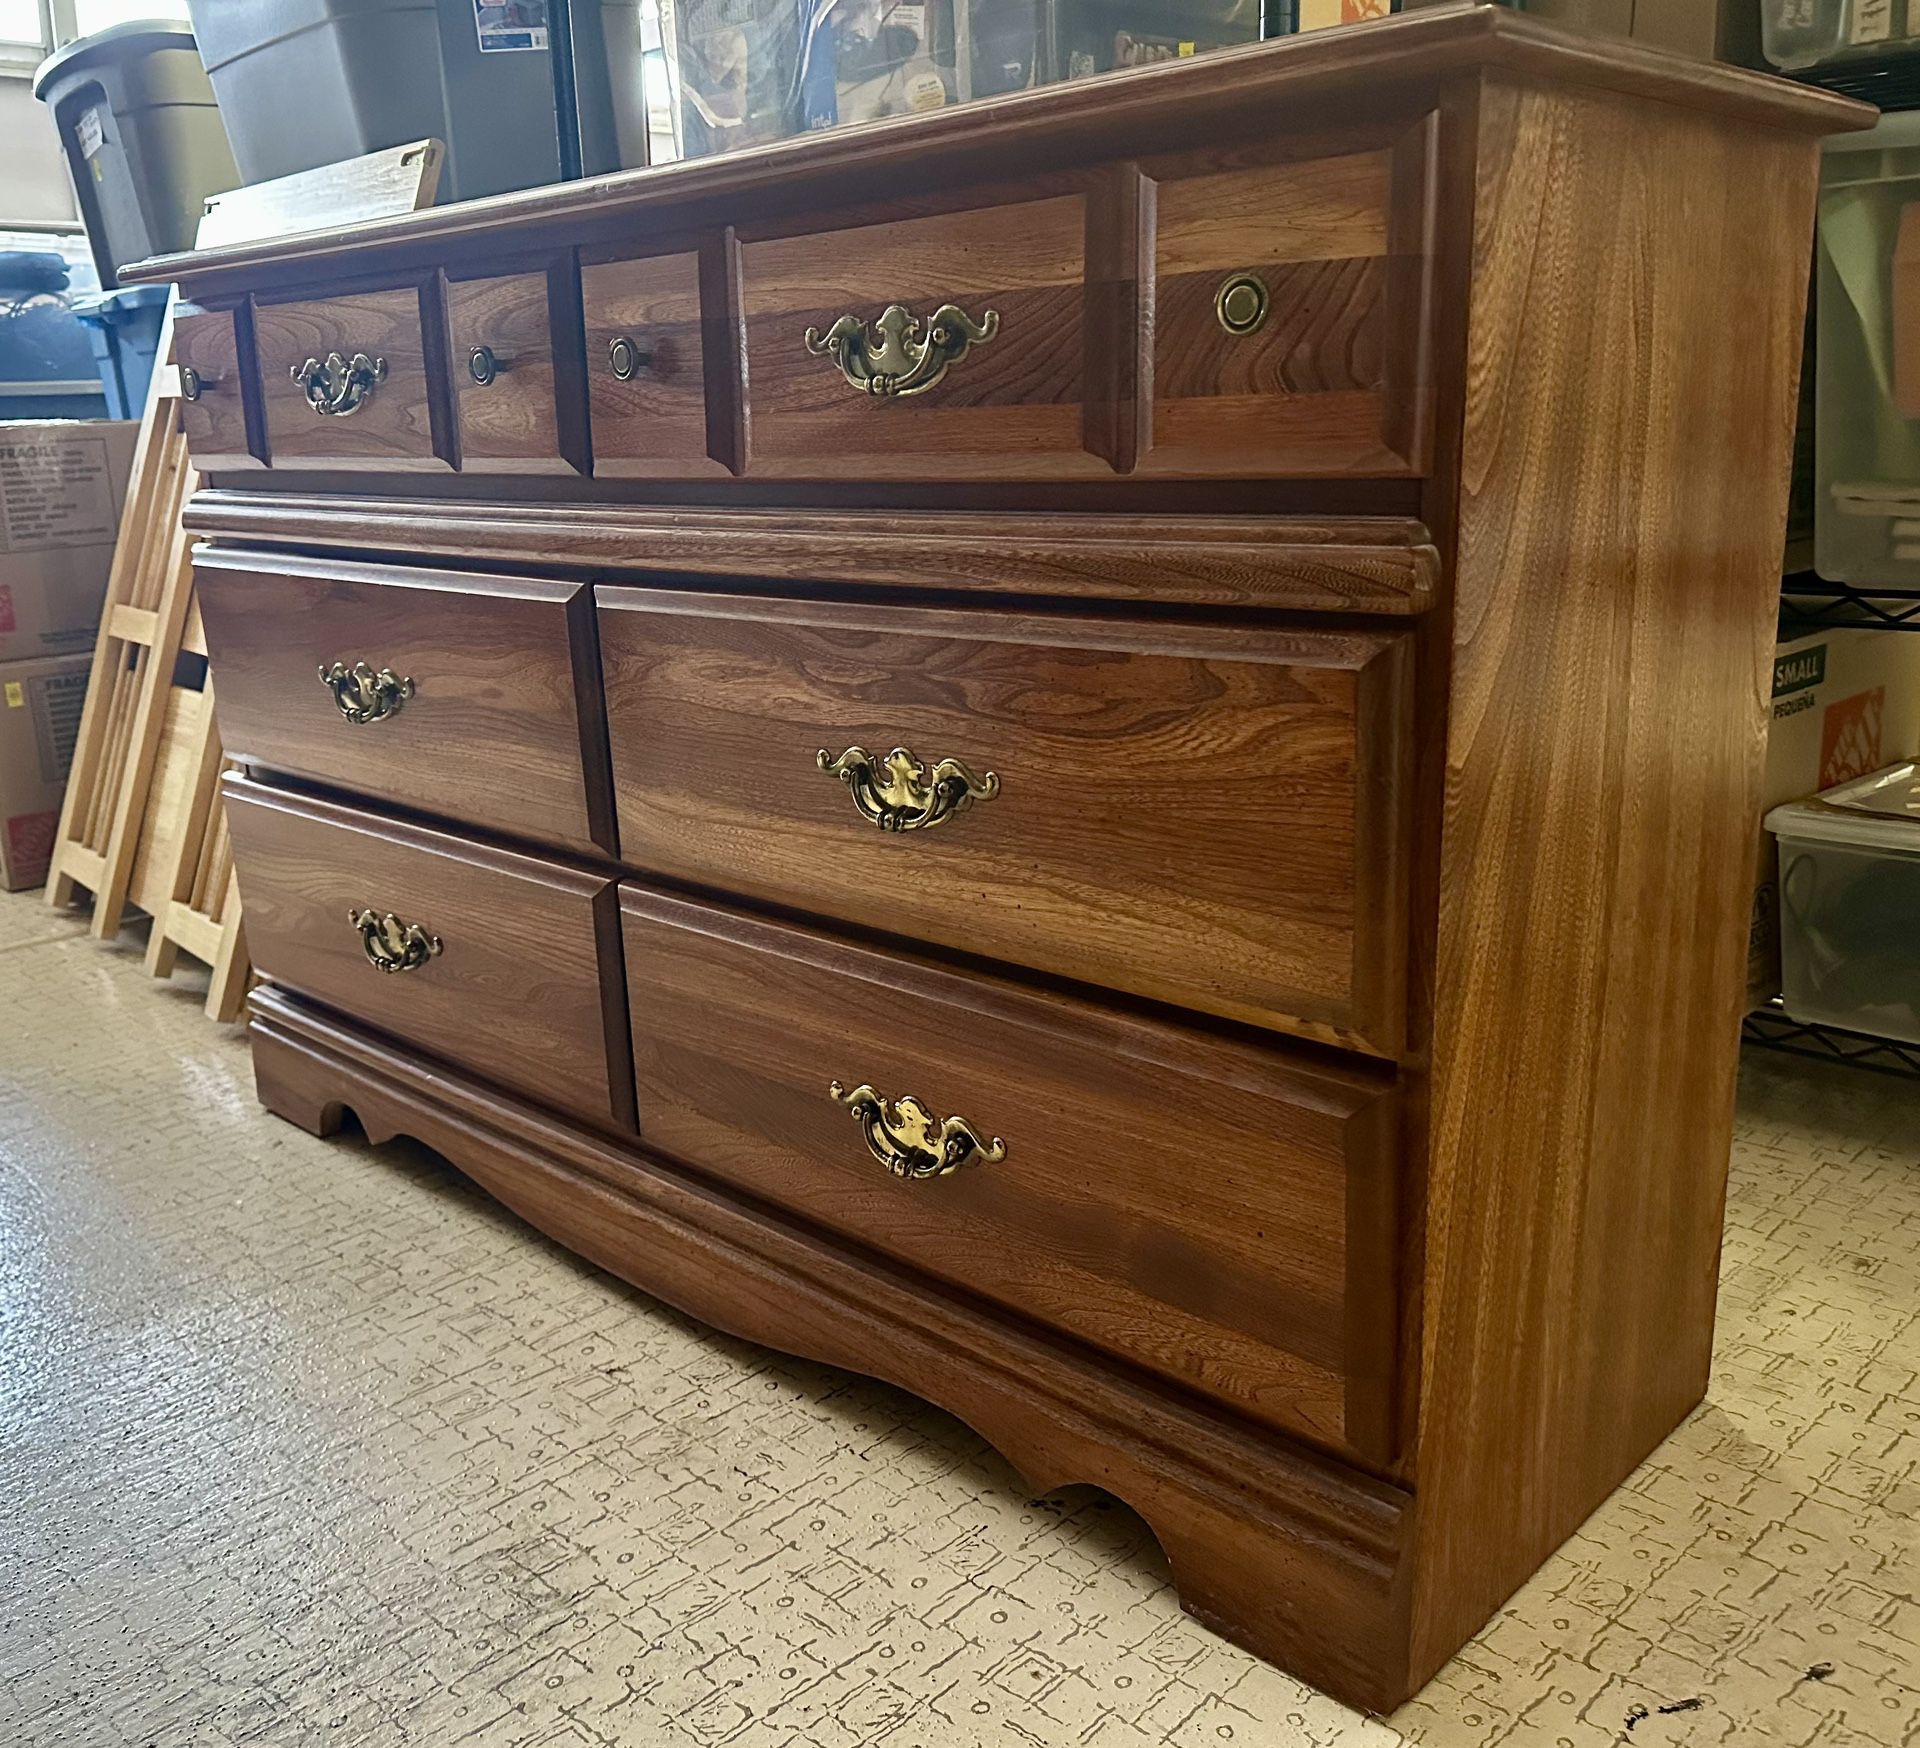 Lovely Chest of Drawers  $70. OBO. Cash Only 